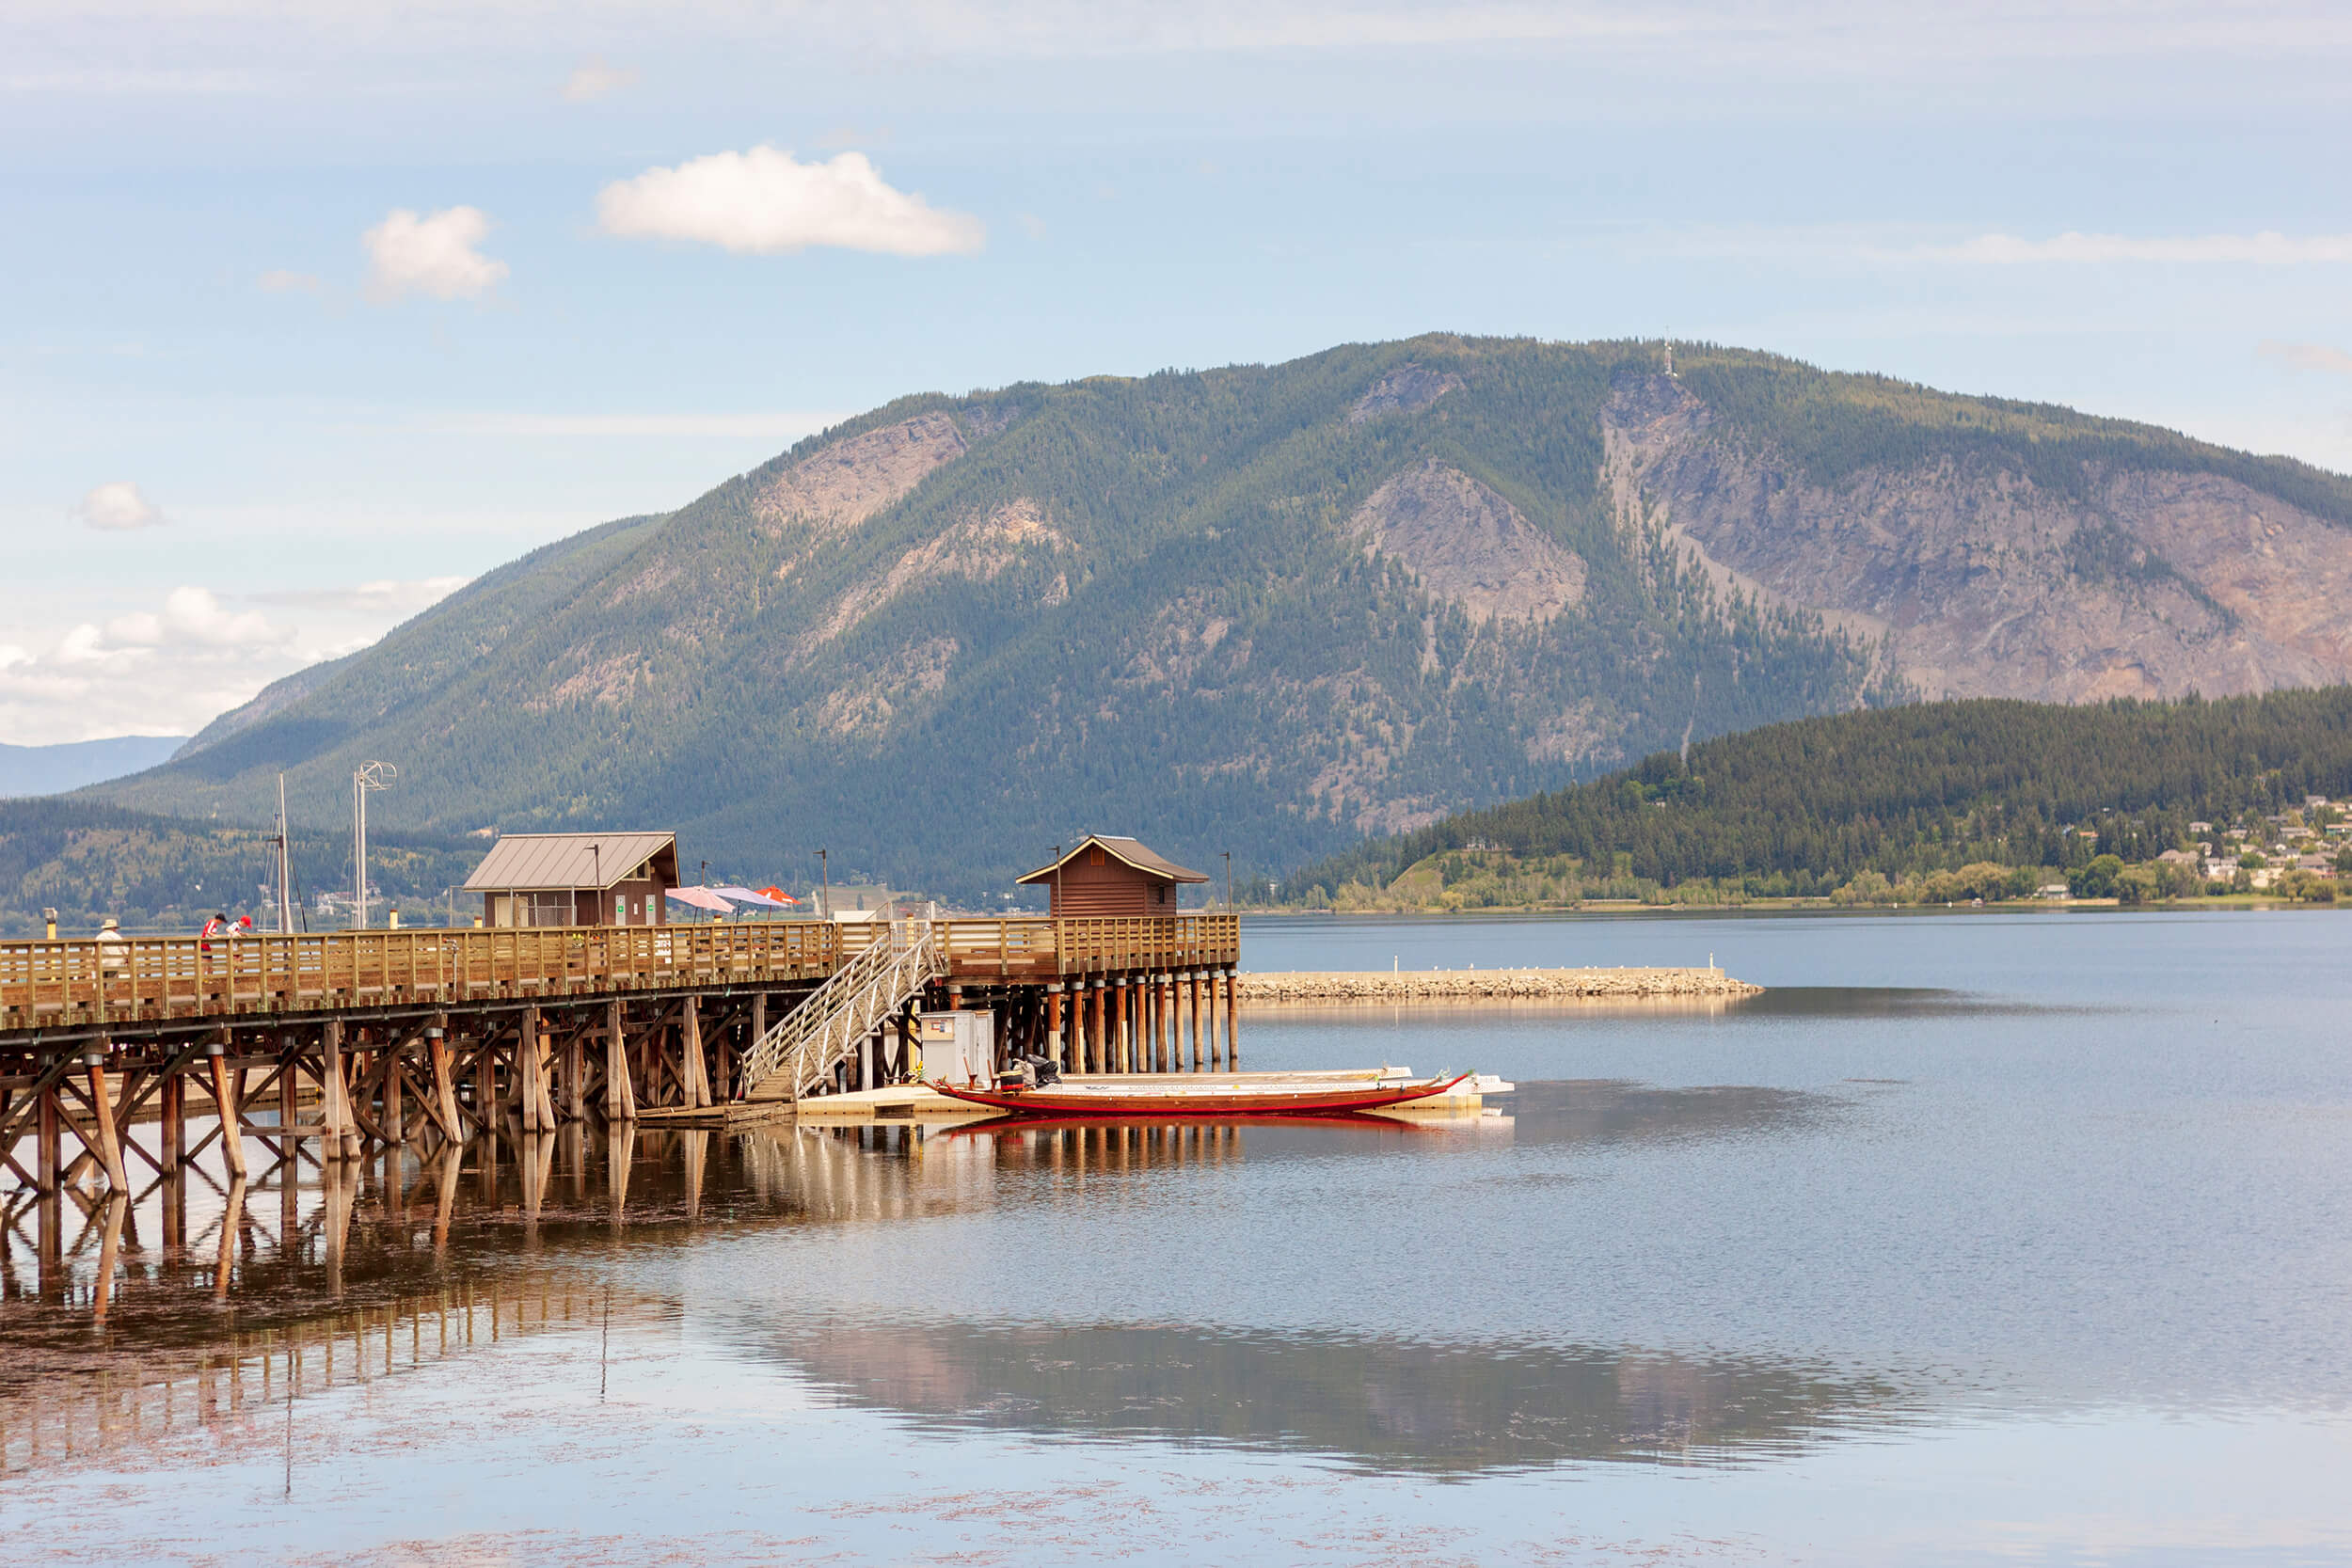 View of a dock over Shuswap Lake in Central British Columbia